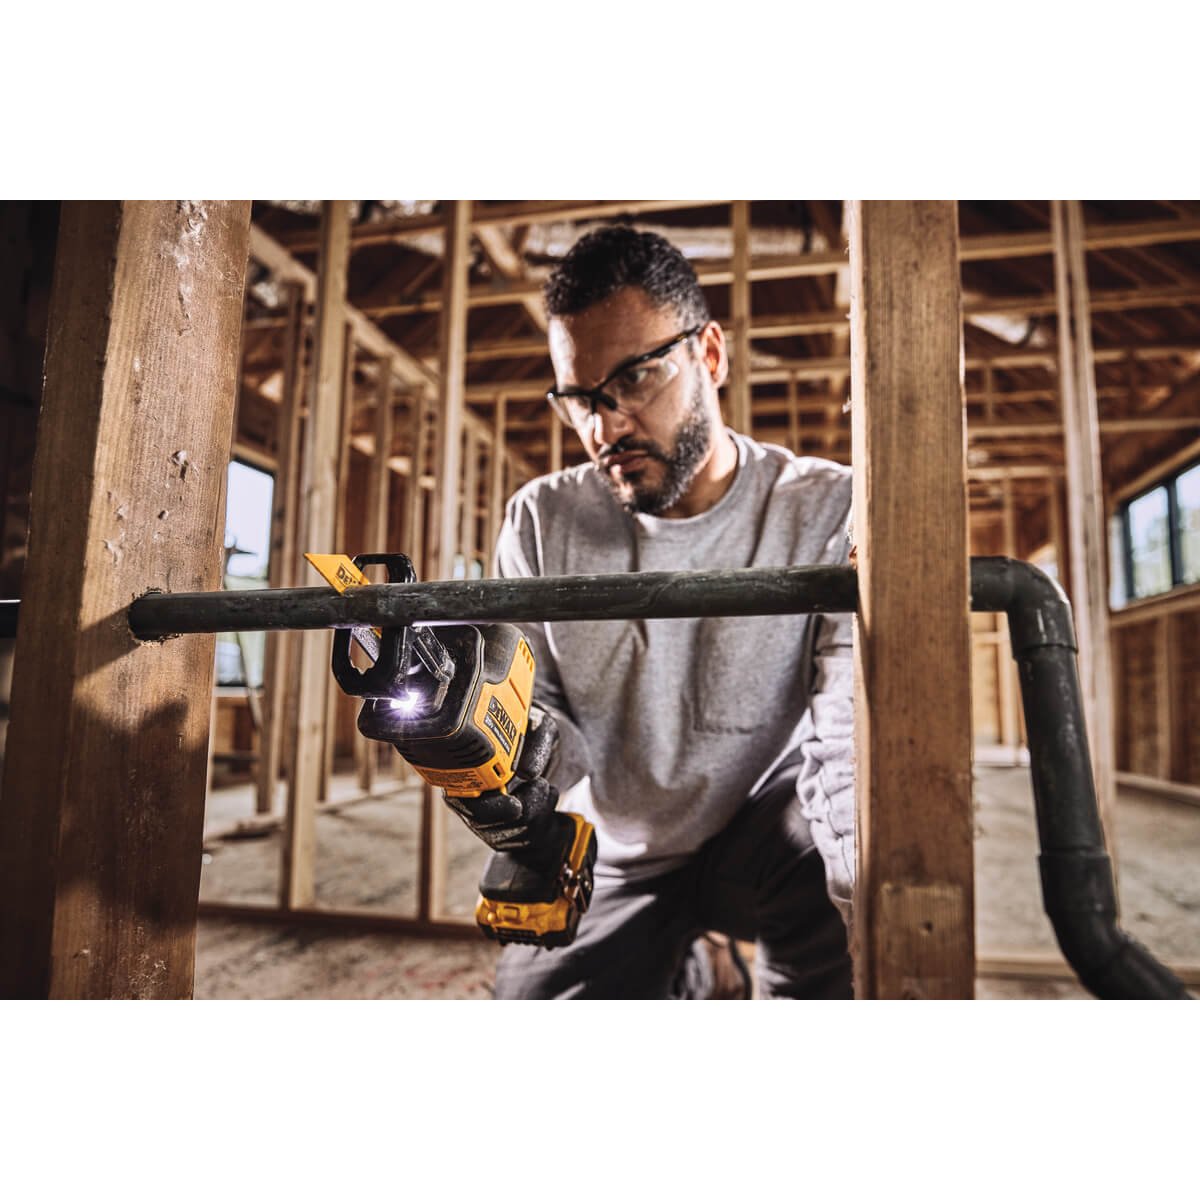 DEWALT DCS369B ATOMIC 20V MAX* CORDLESS ONE-HANDED RECIPROCATING SAW (TOOL ONLY)